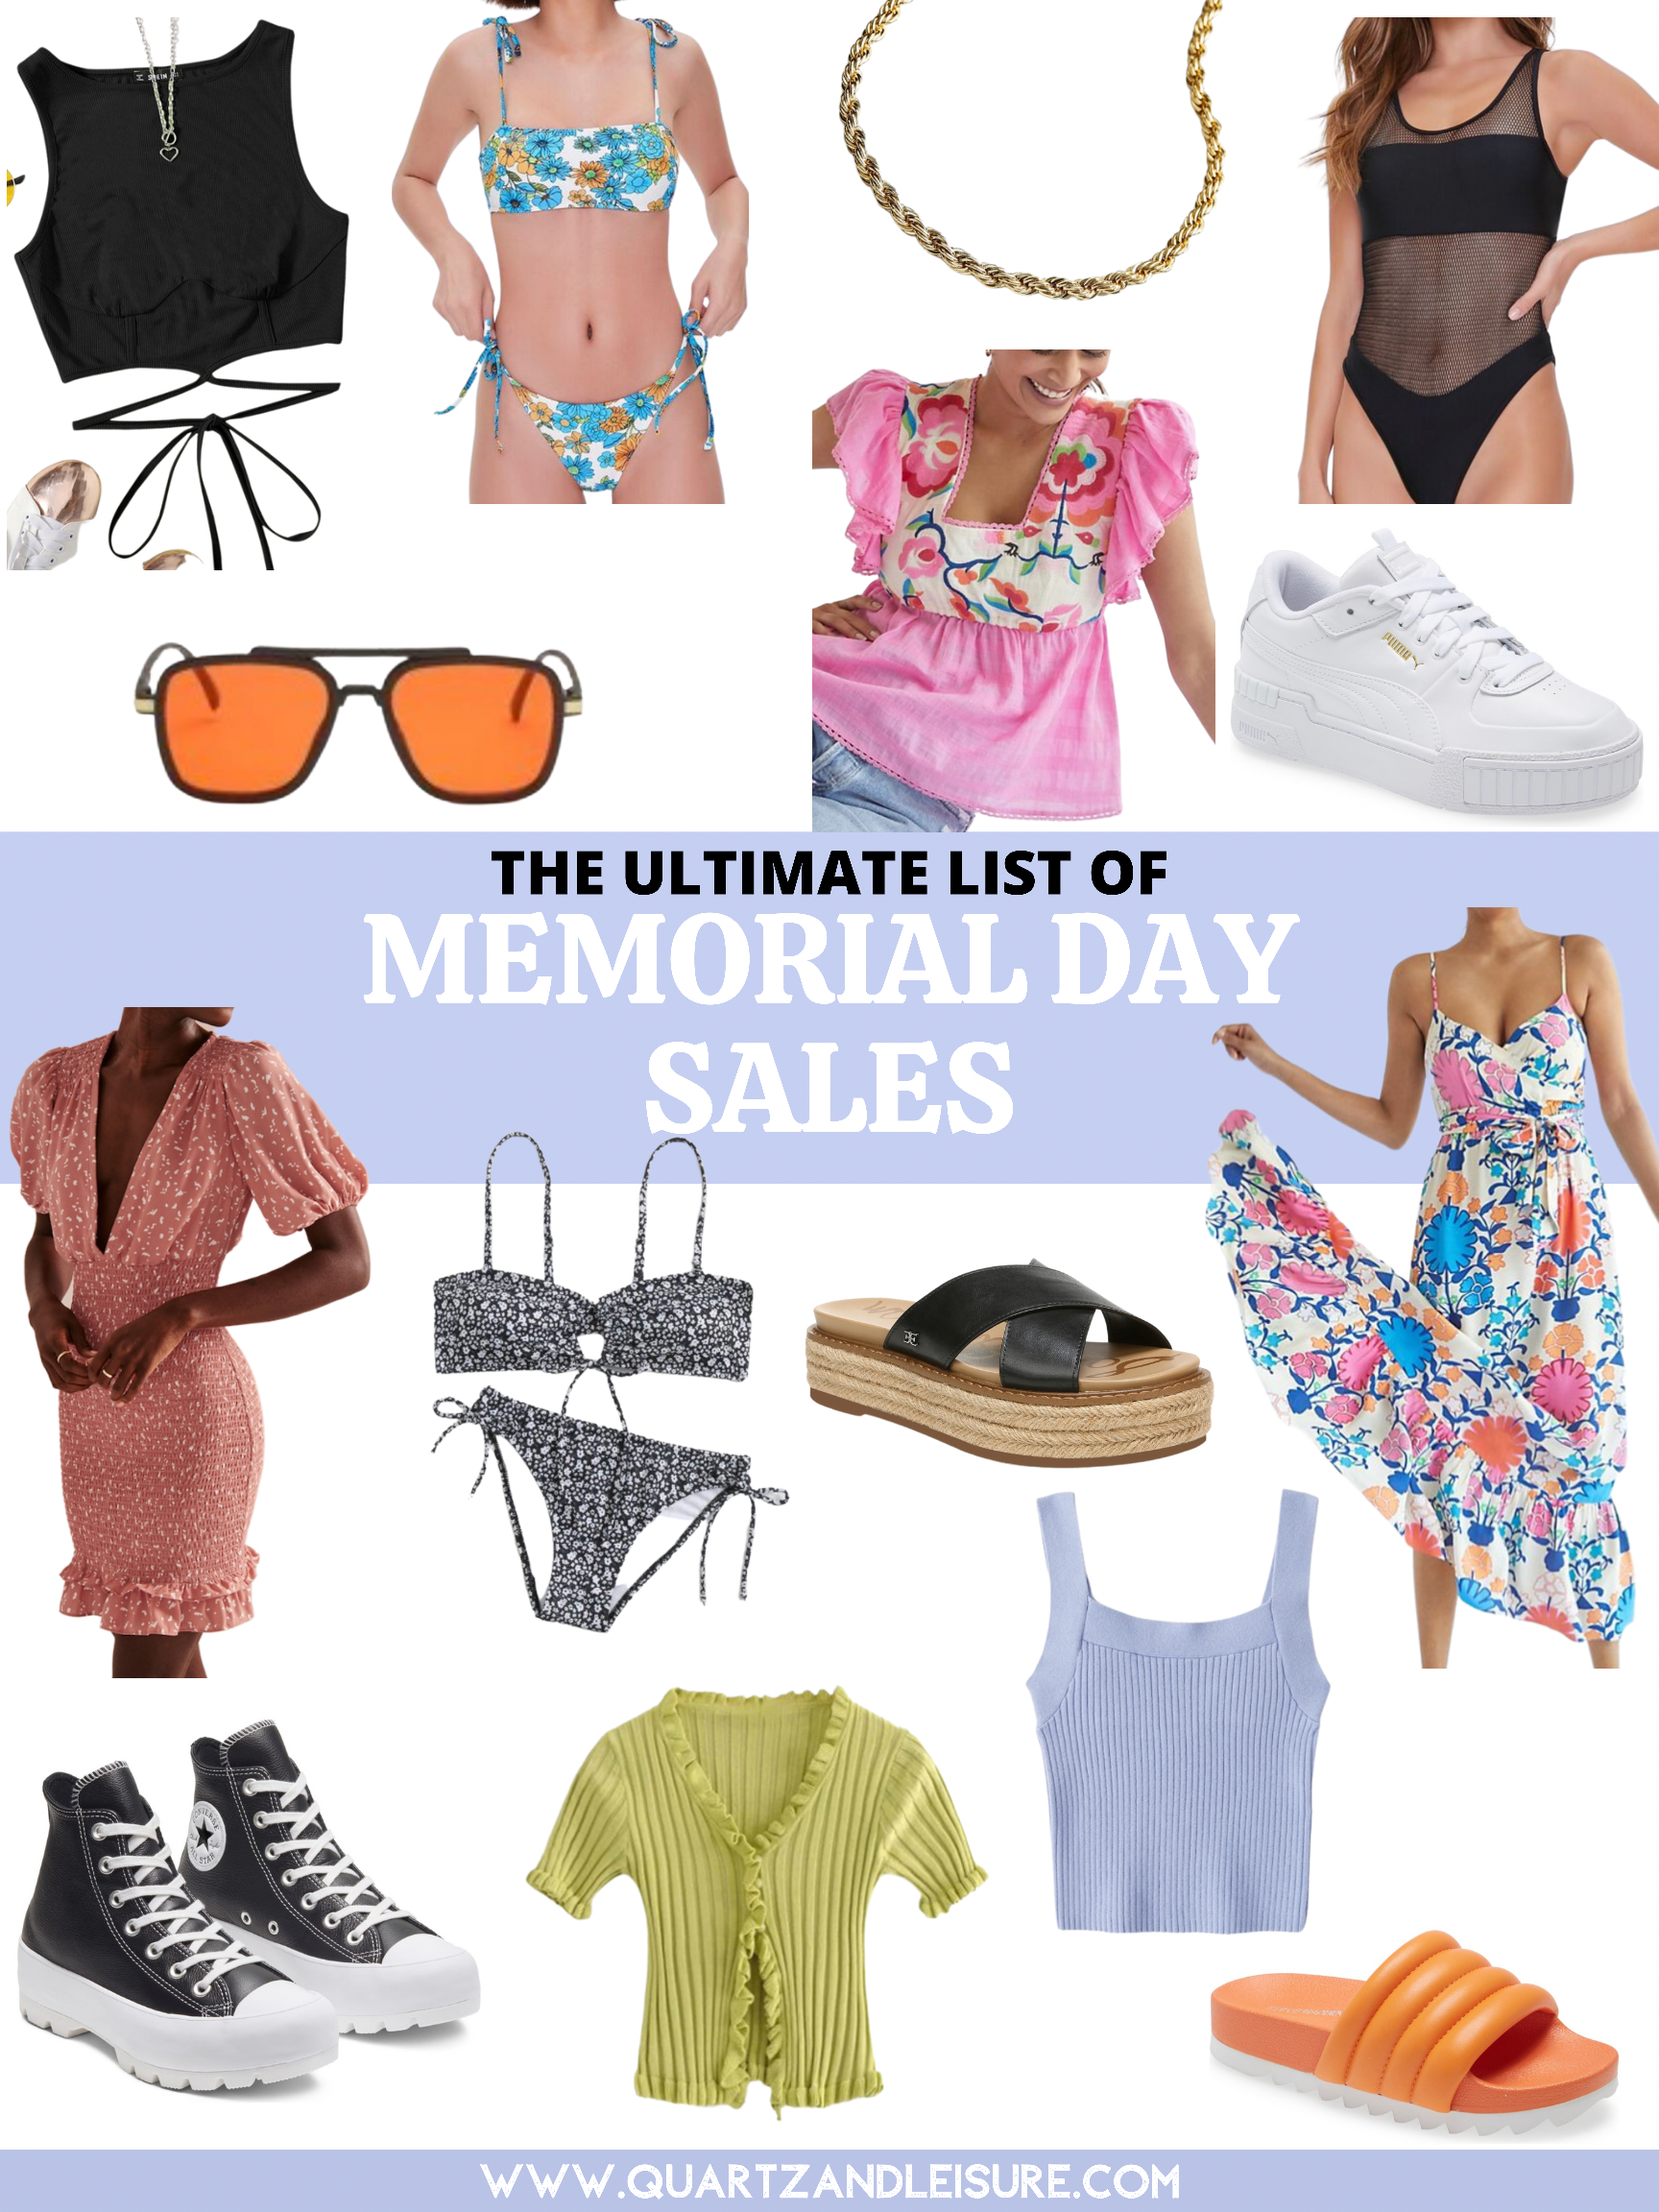 The Ultimate List of Memorial Day Sales 2021